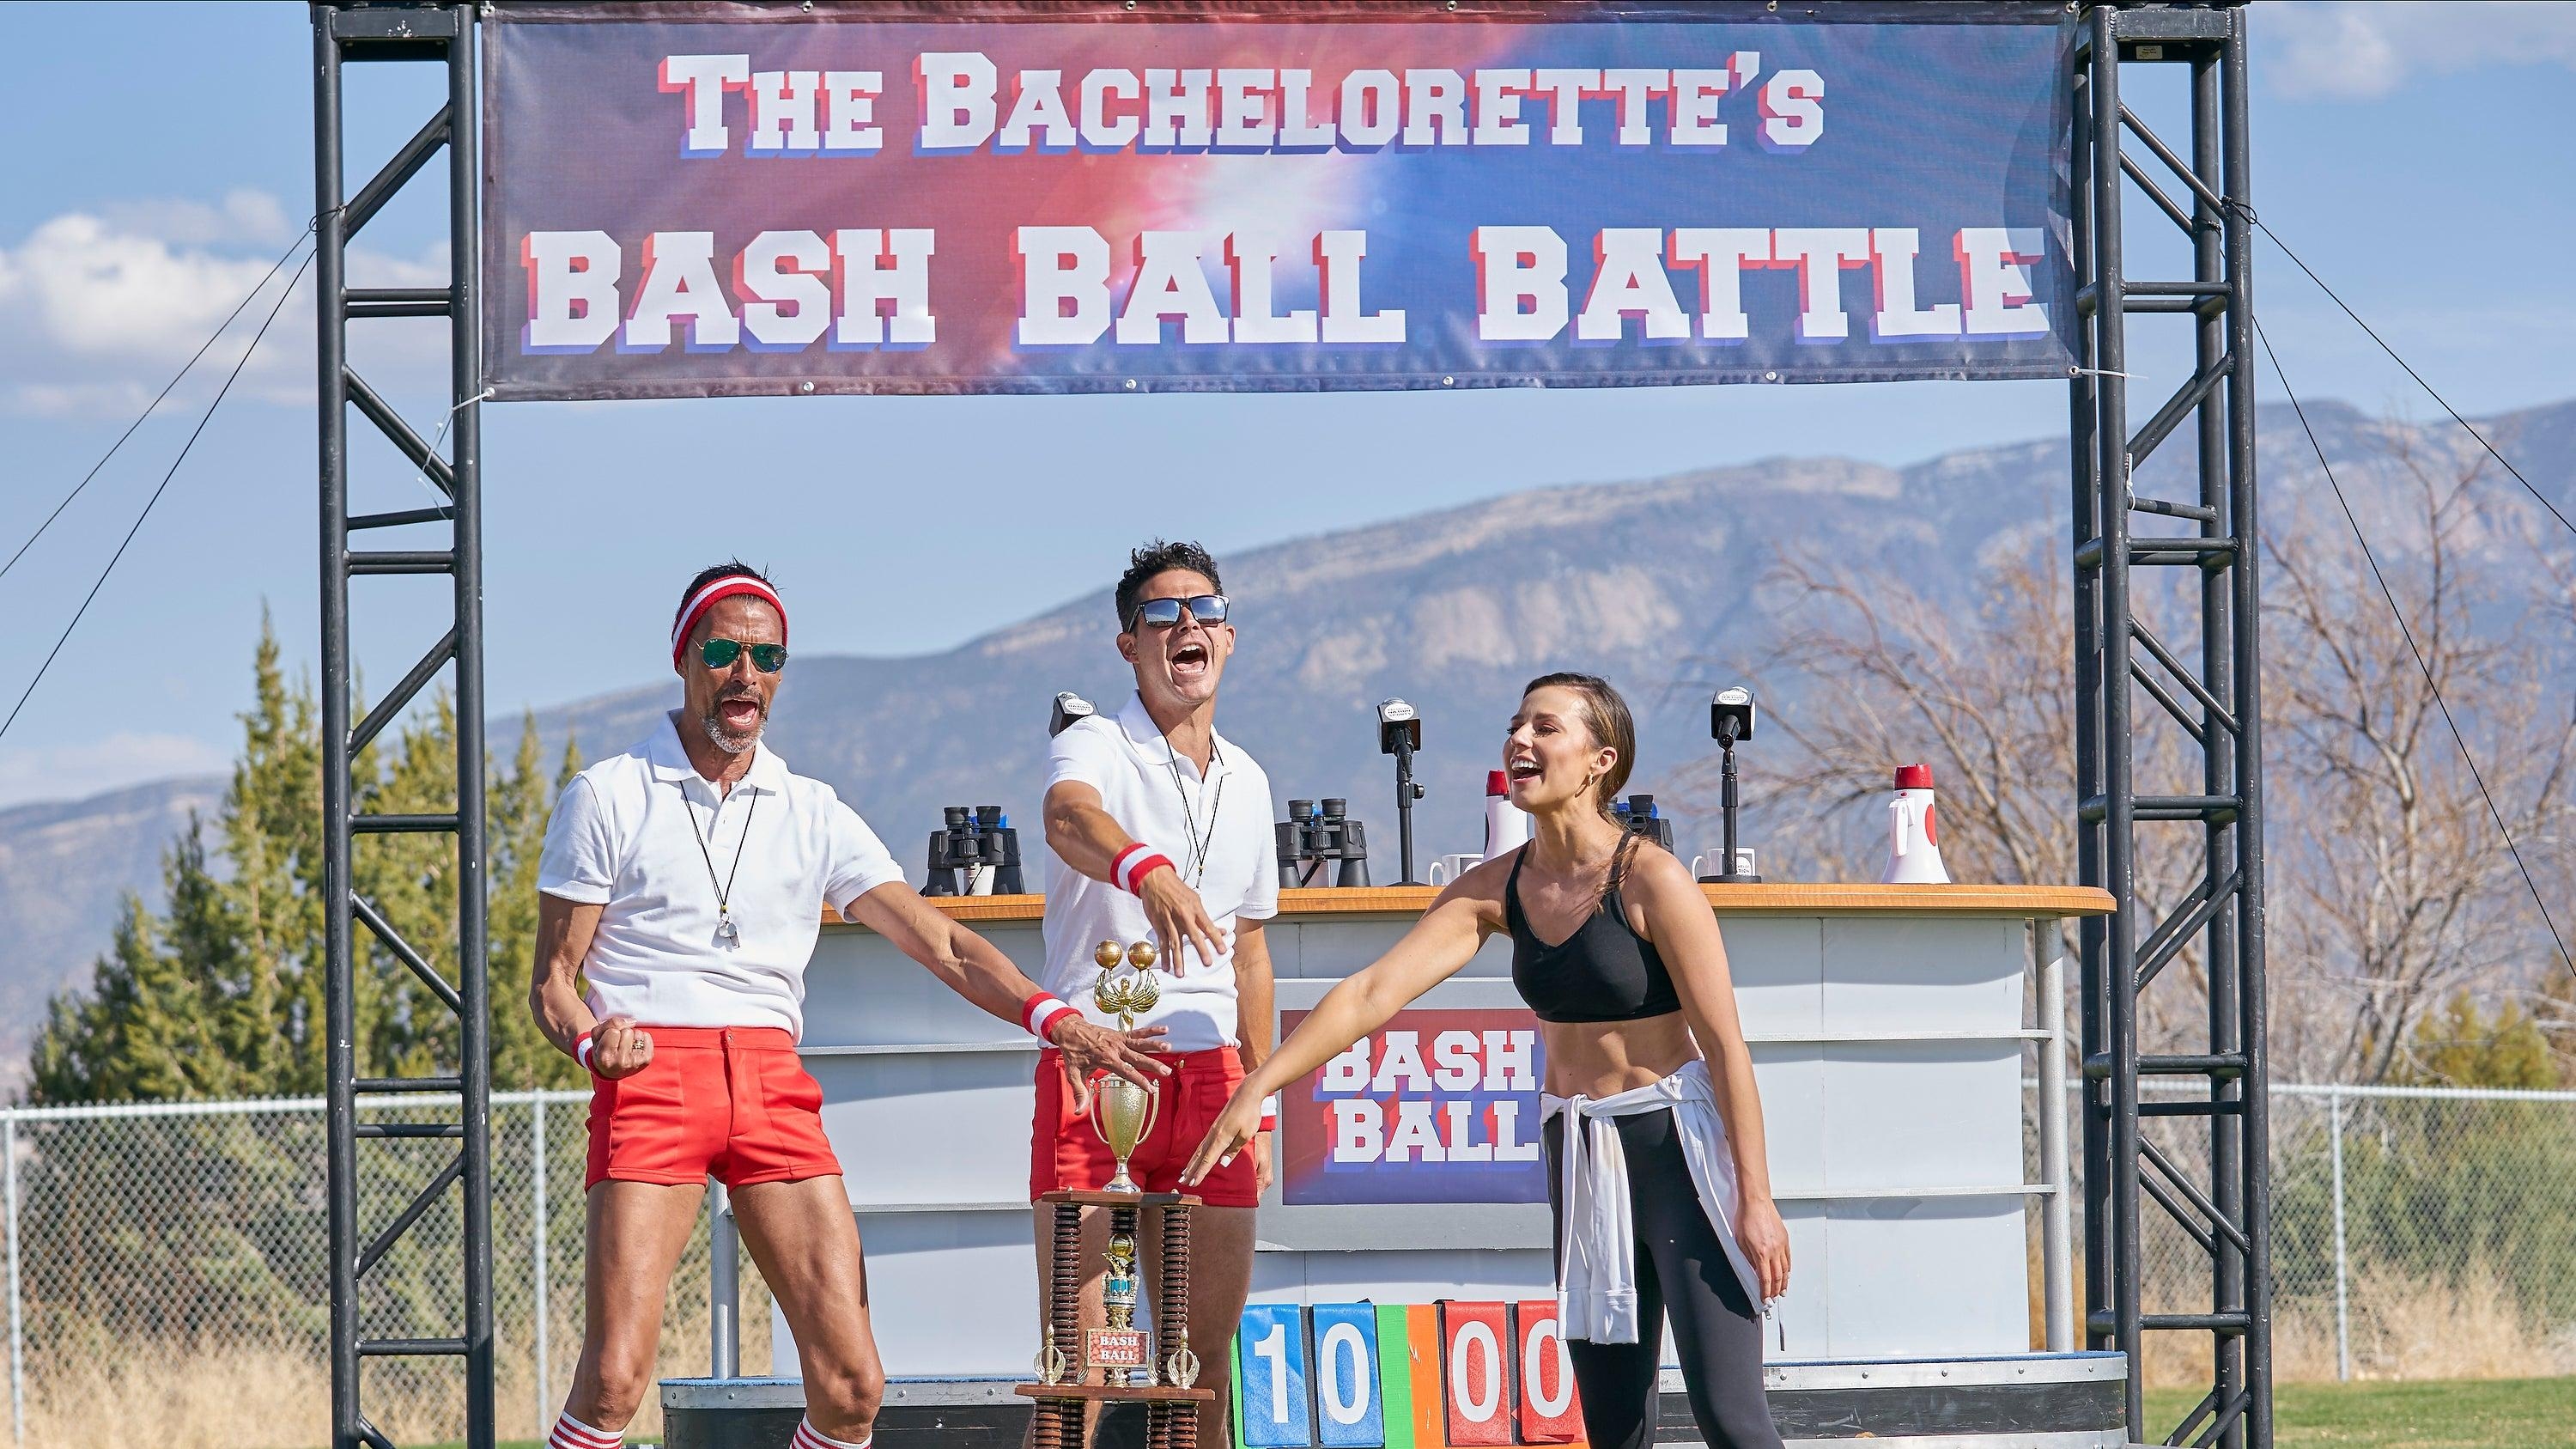 The Bachelorette bashes some balls in the “The Bachelorette’s Bash Ball Battle”